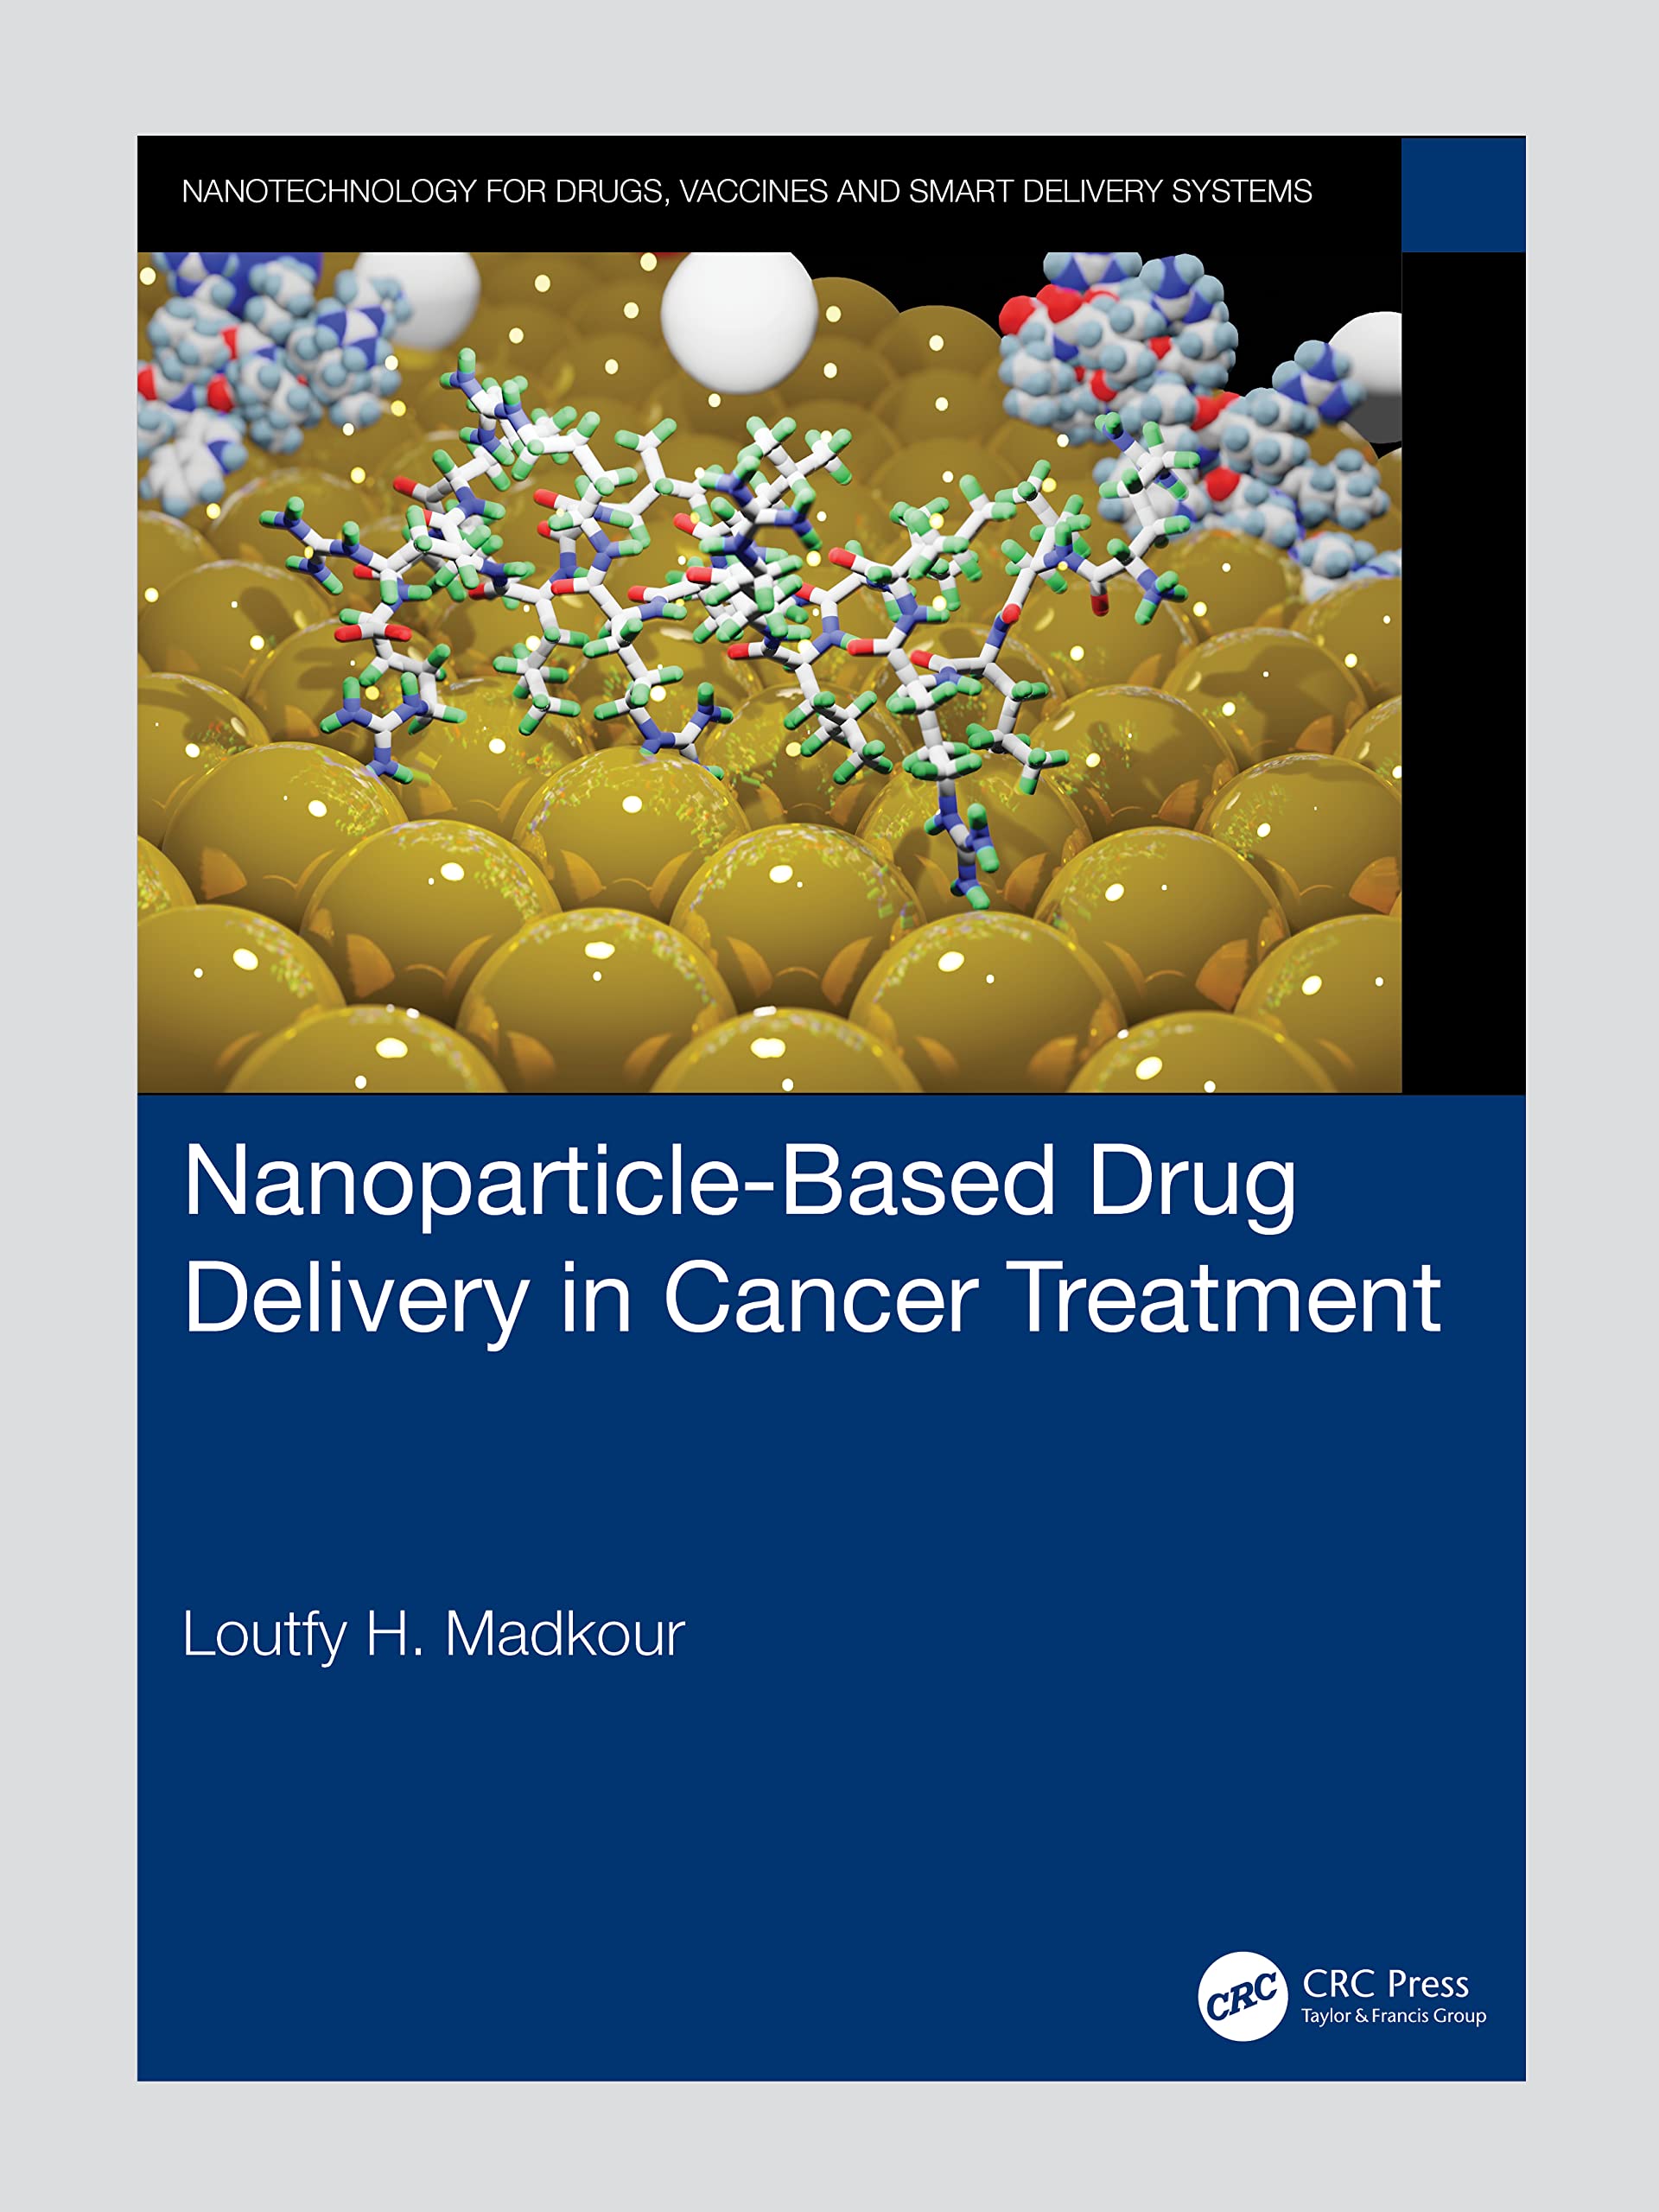 Nanoparticle-Based Drug Delivery in Cancer Treatment (Nanotechnology for Drugs, Vaccines and Smart Delivery Systems)